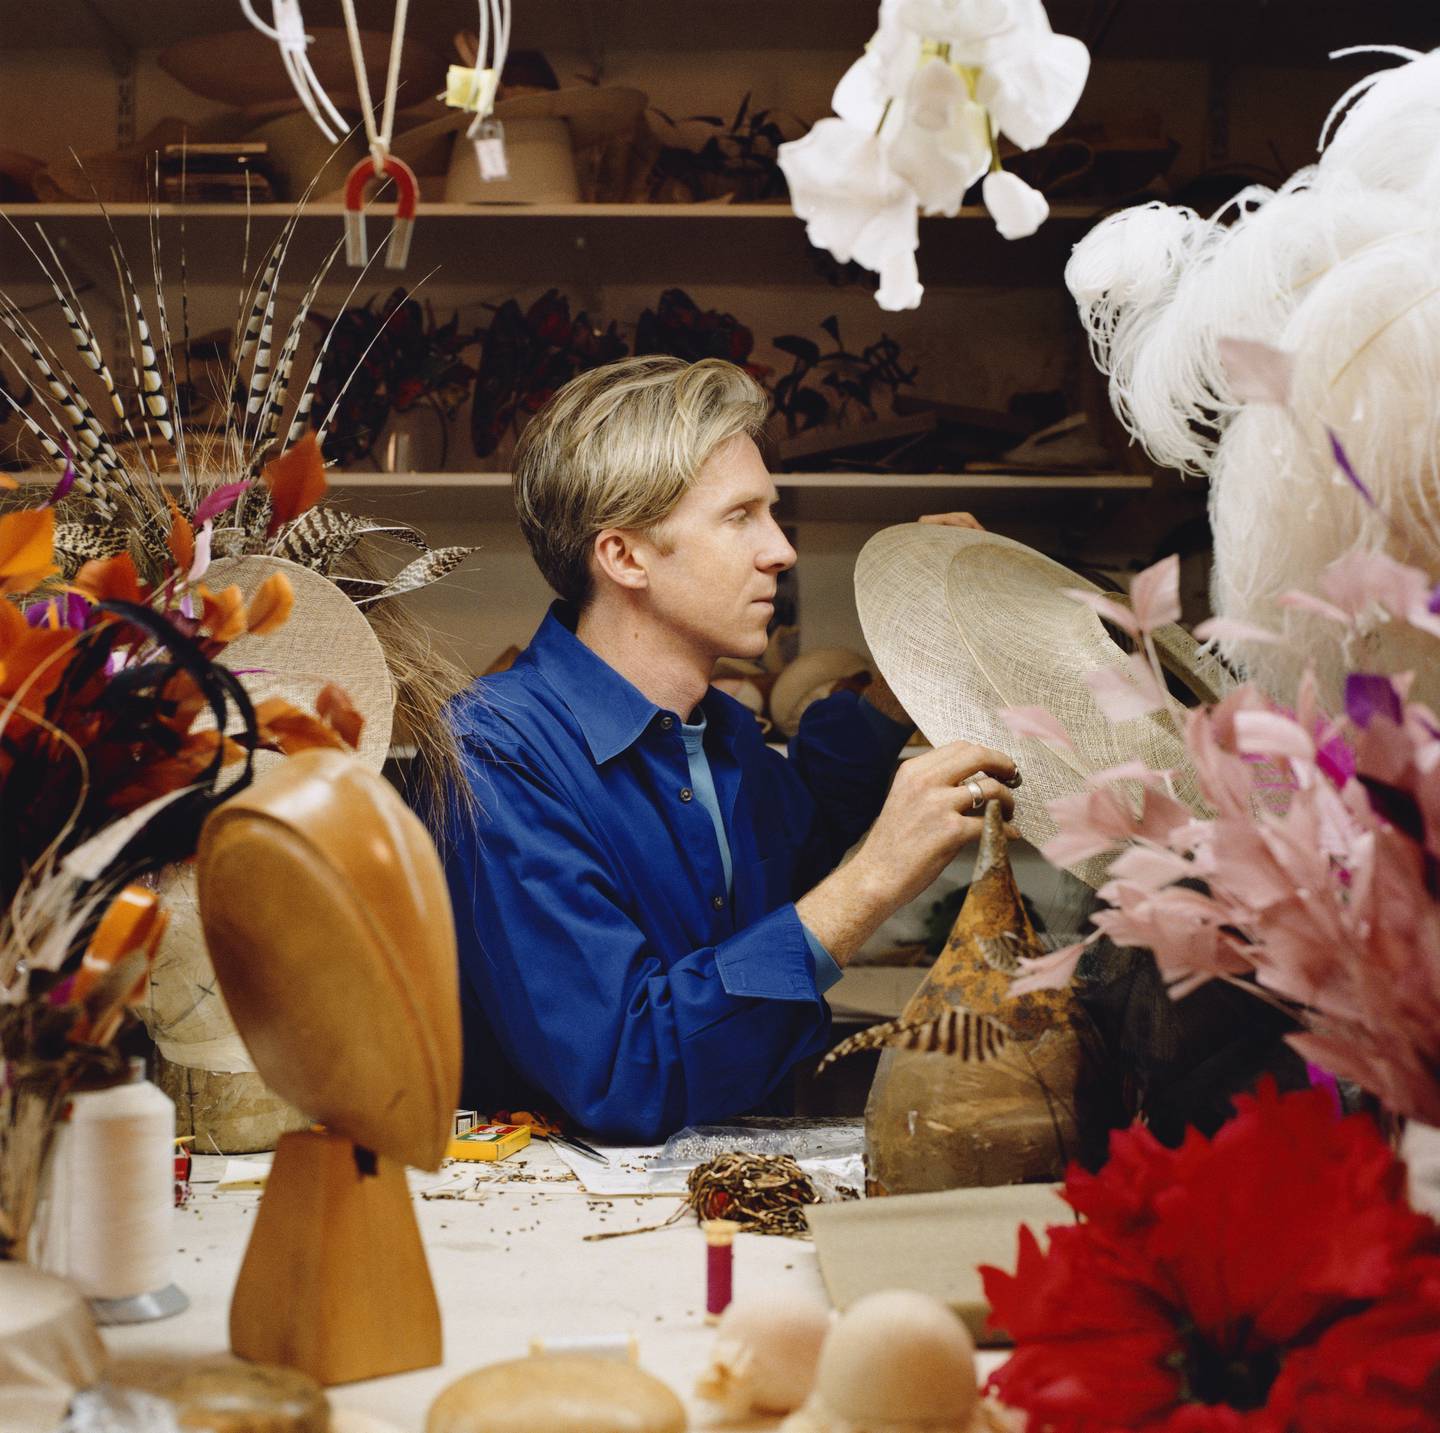 Milliner Philip Treacy, who has made hats for several members of the British royal family, in his workshop. Photo: Philip Treacy